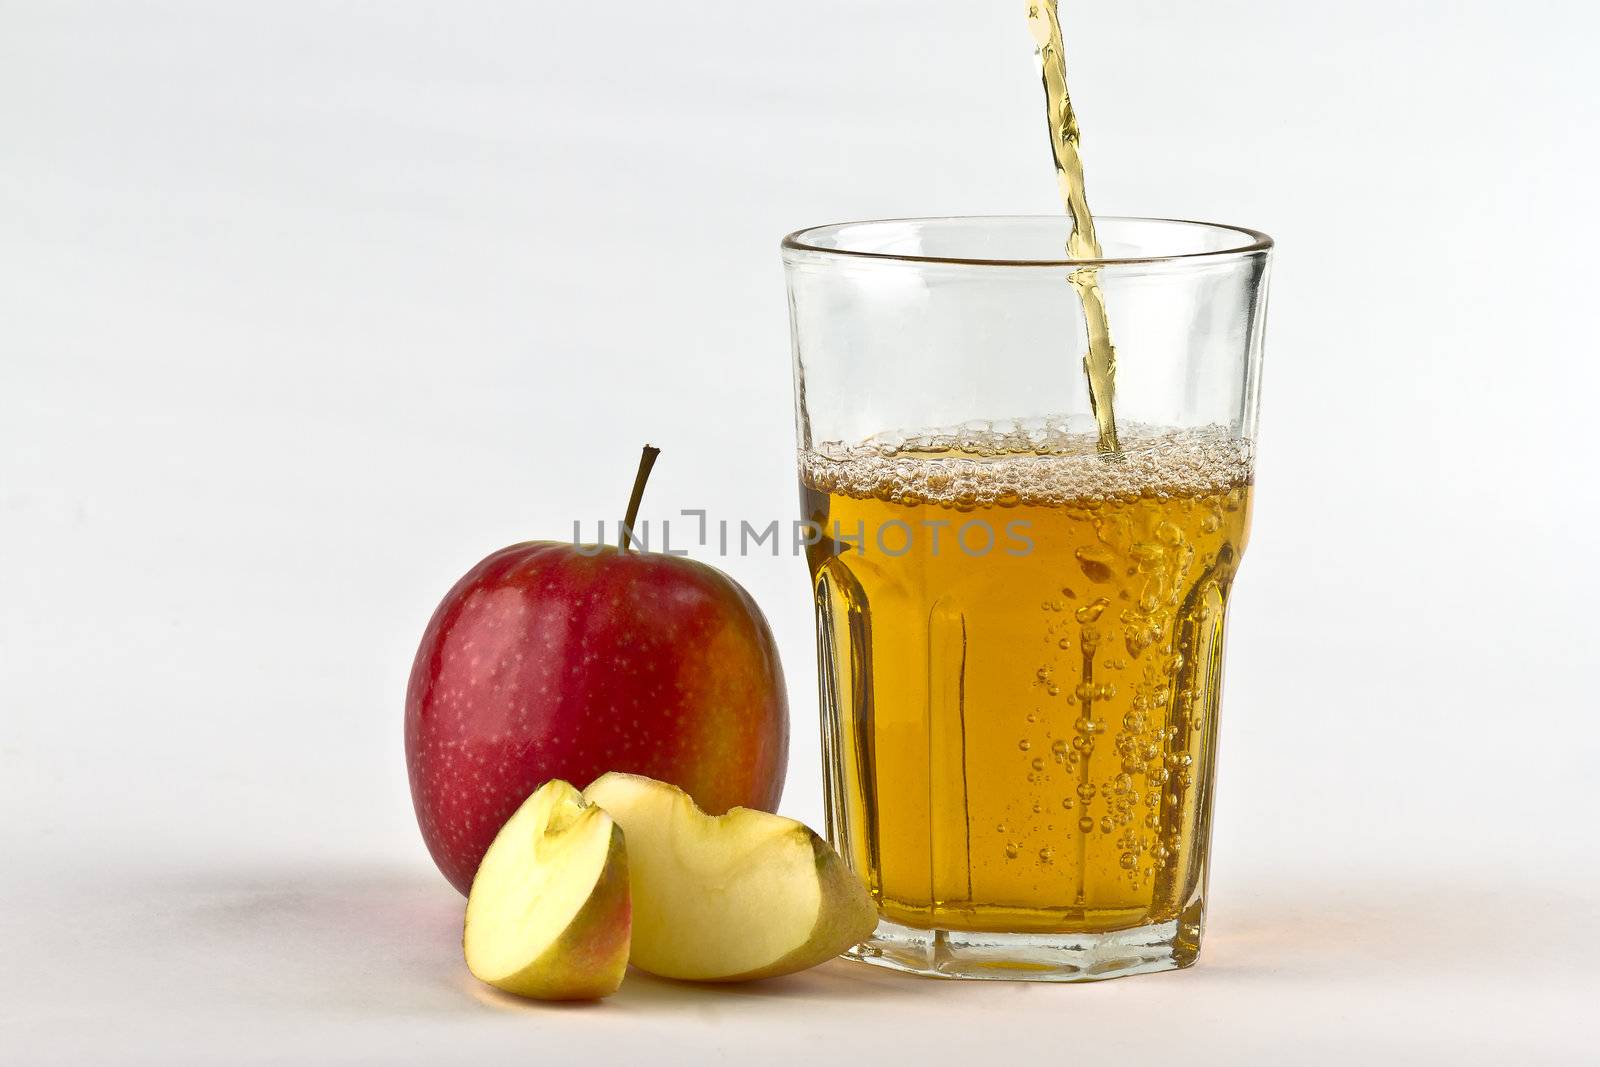 Apple cider pouring down into glass by lavsen